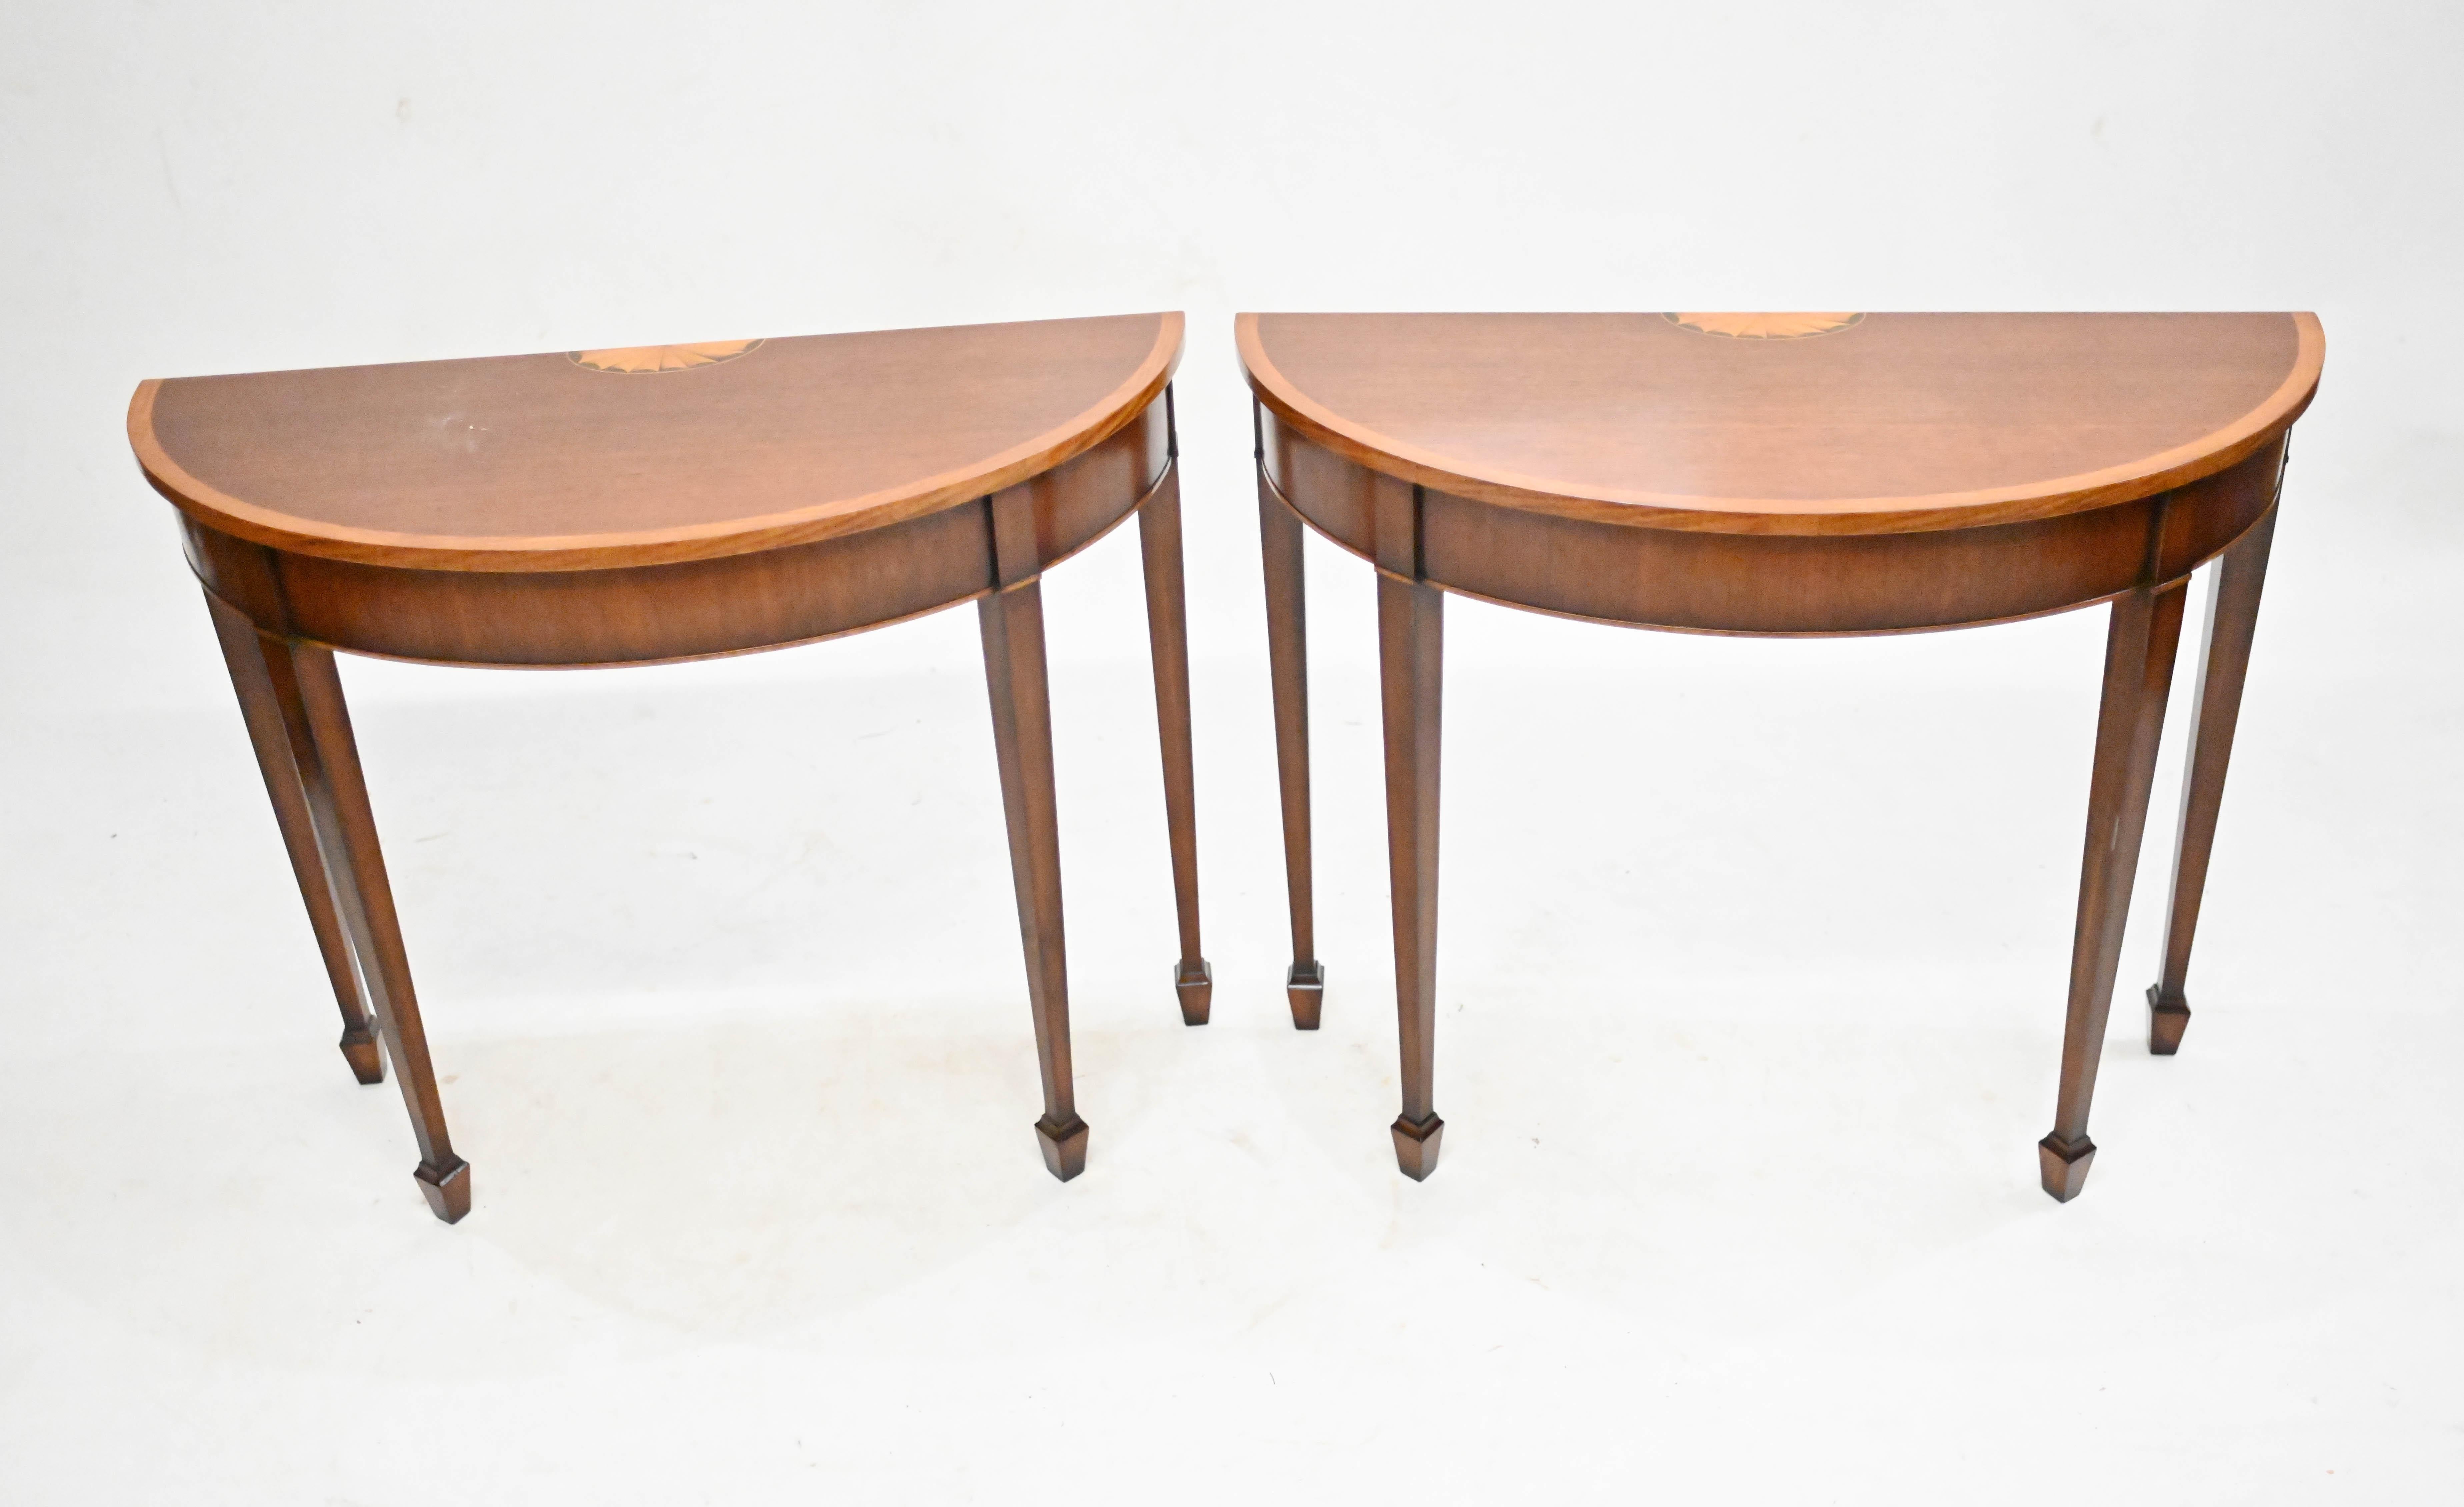 Pair of mahogany demi lune console tables in the Sheraton manner
Such an elegant and refined design with the tapered legs
Classic piece of furniture great for any interior
Features satinwood inlay, cross banding and a shell motif
Offered in great